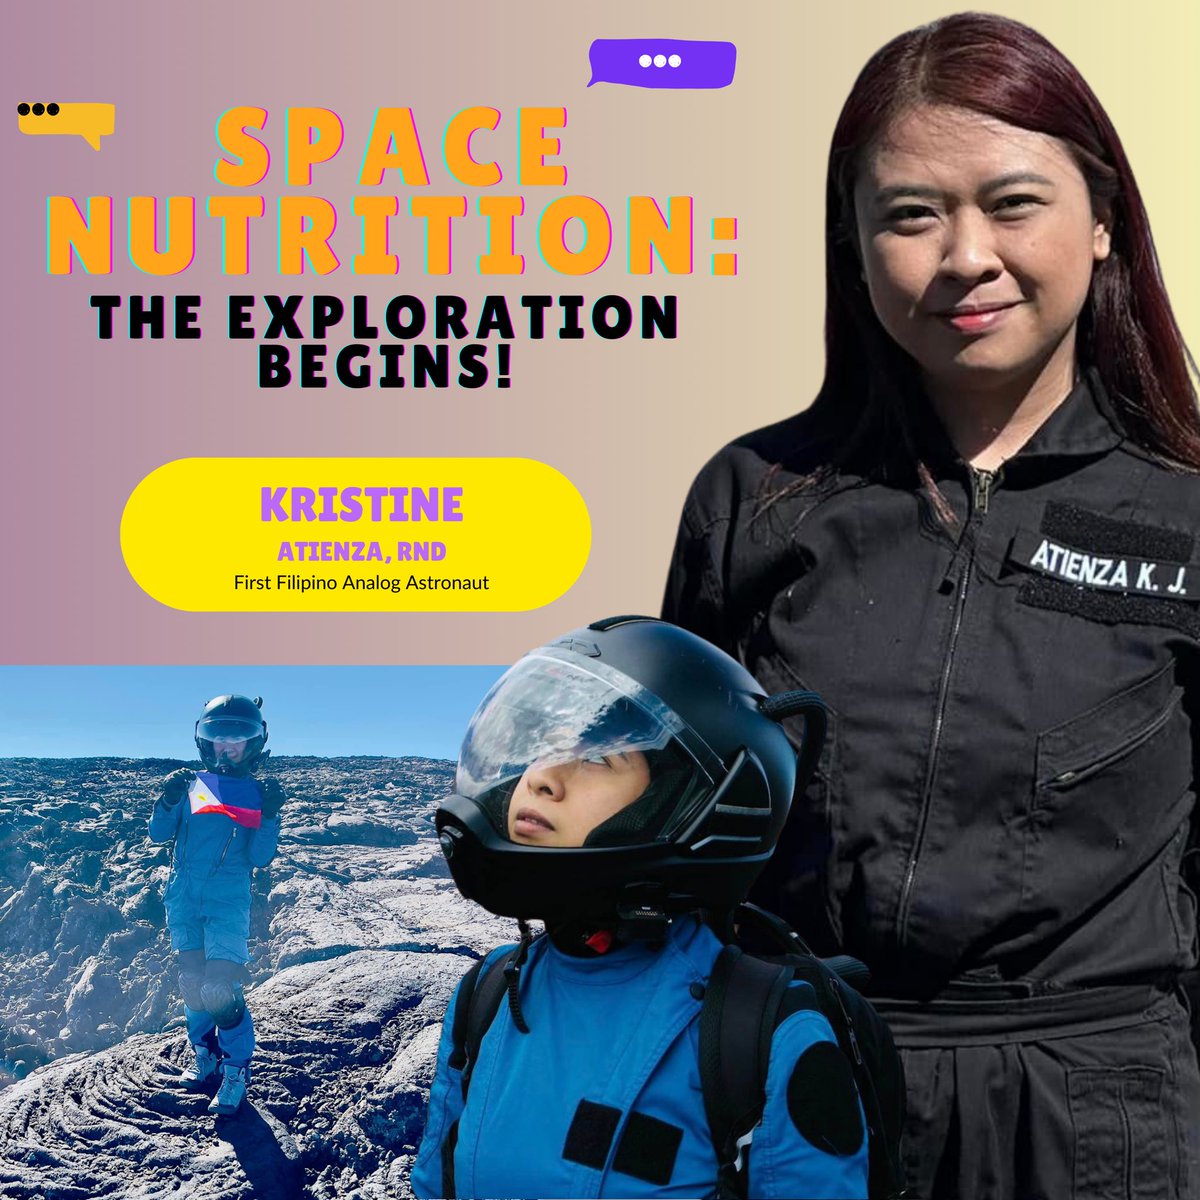 As an RND, have you ever considered working in outer space? 😱🗼

Listen to how Kristine, the First Filipino Analog Astronaut, started her interest in Space Nutrition. 👨‍🚀 Catch the full episode on Spotify starting May 9, 5pm!

#spacenutrition #nutritionpodcast